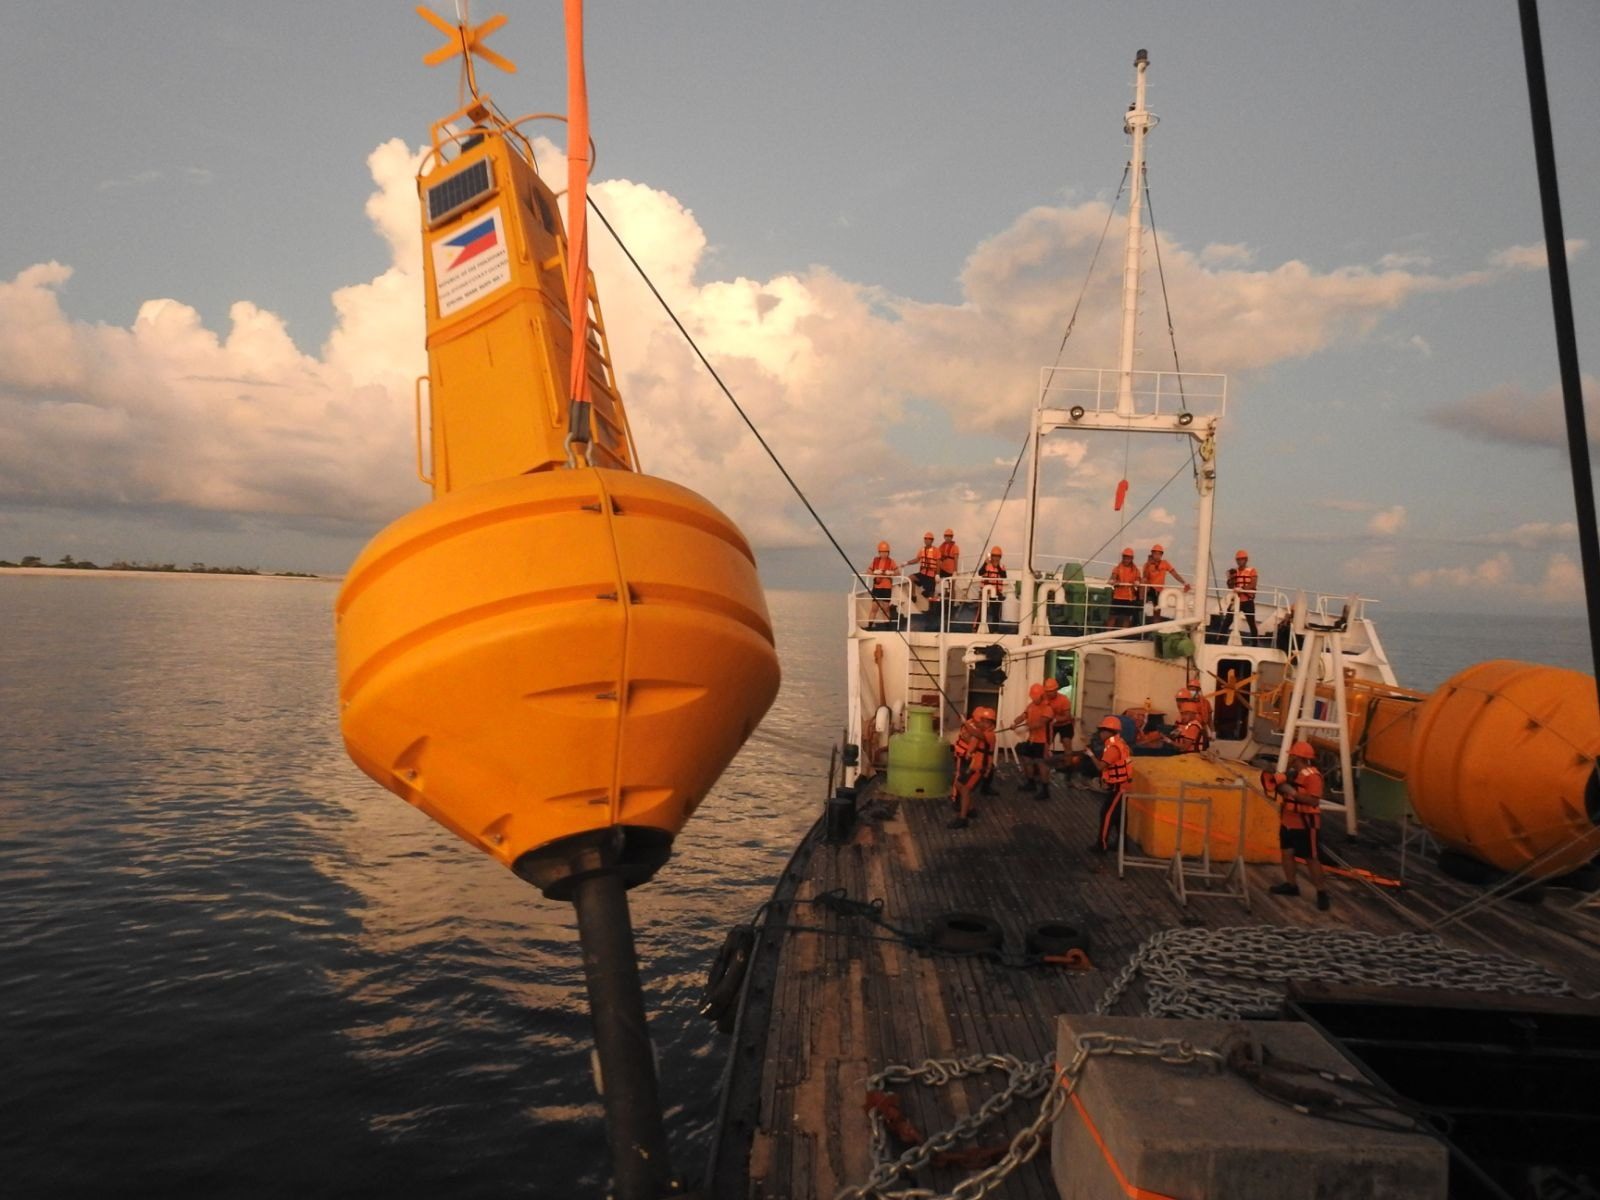 Amid removal claim, PCG says 8 buoys still intact in PH waters, 2 for checking